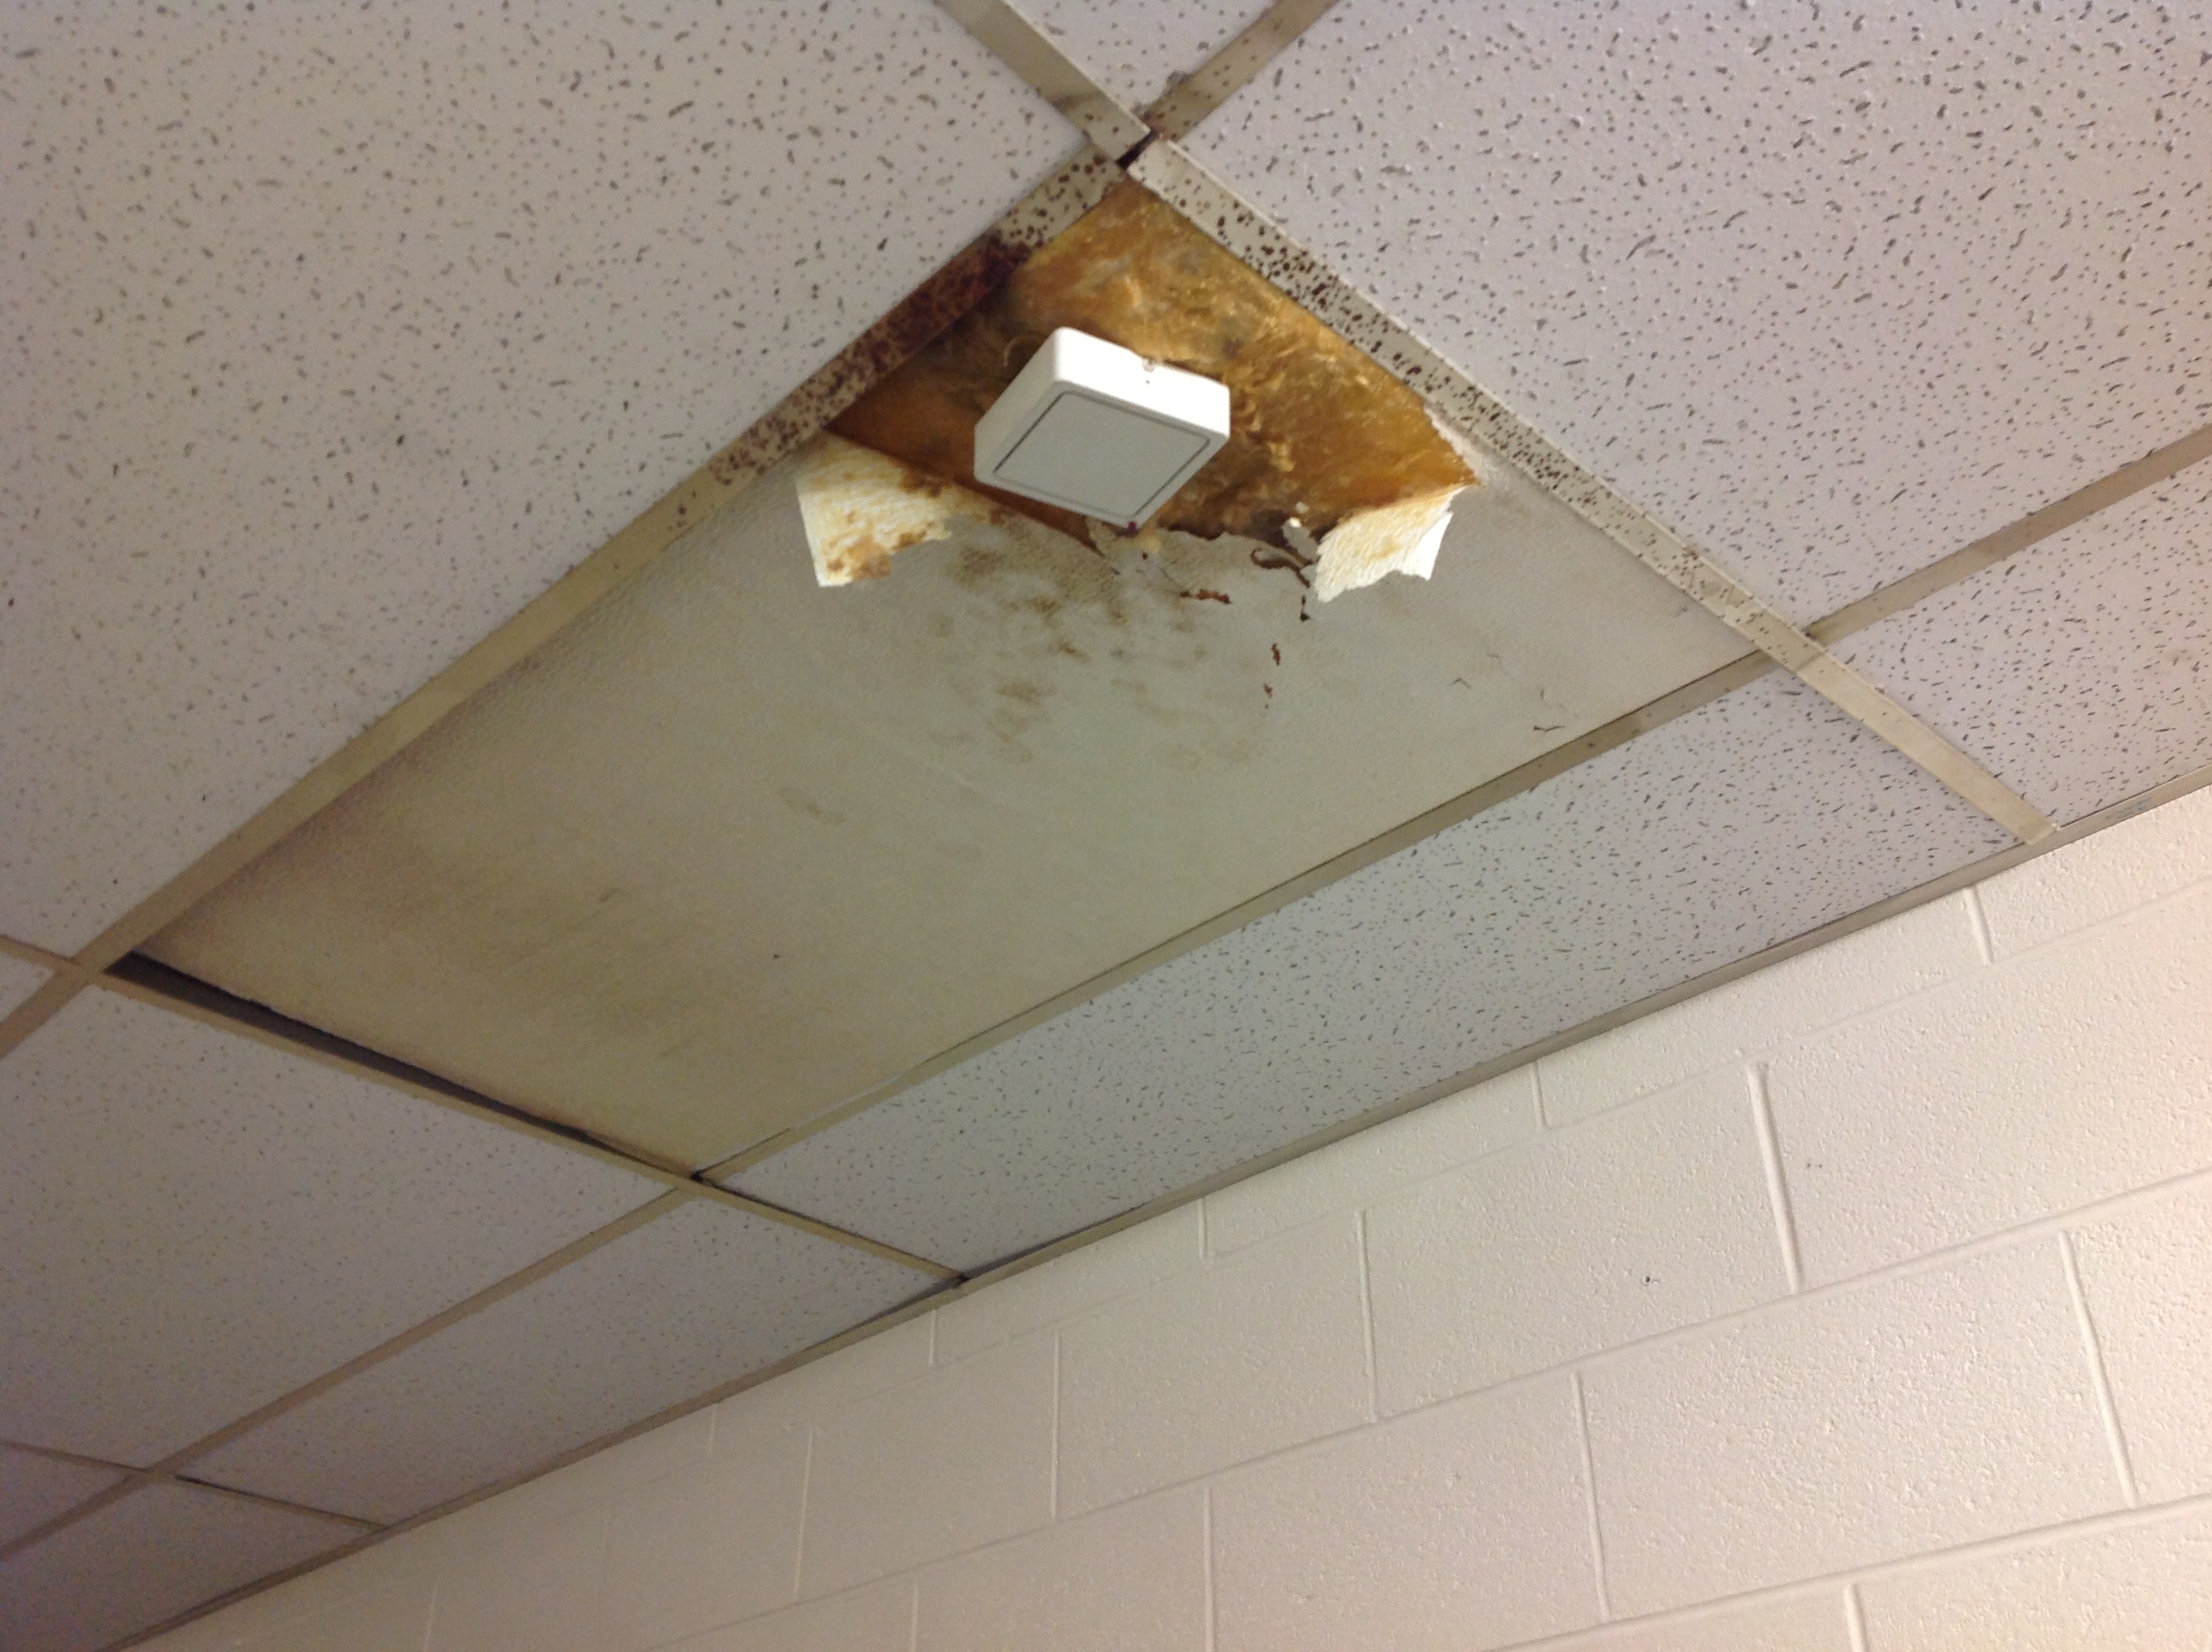 Permalink to Black Mold On Drop Ceiling Tiles